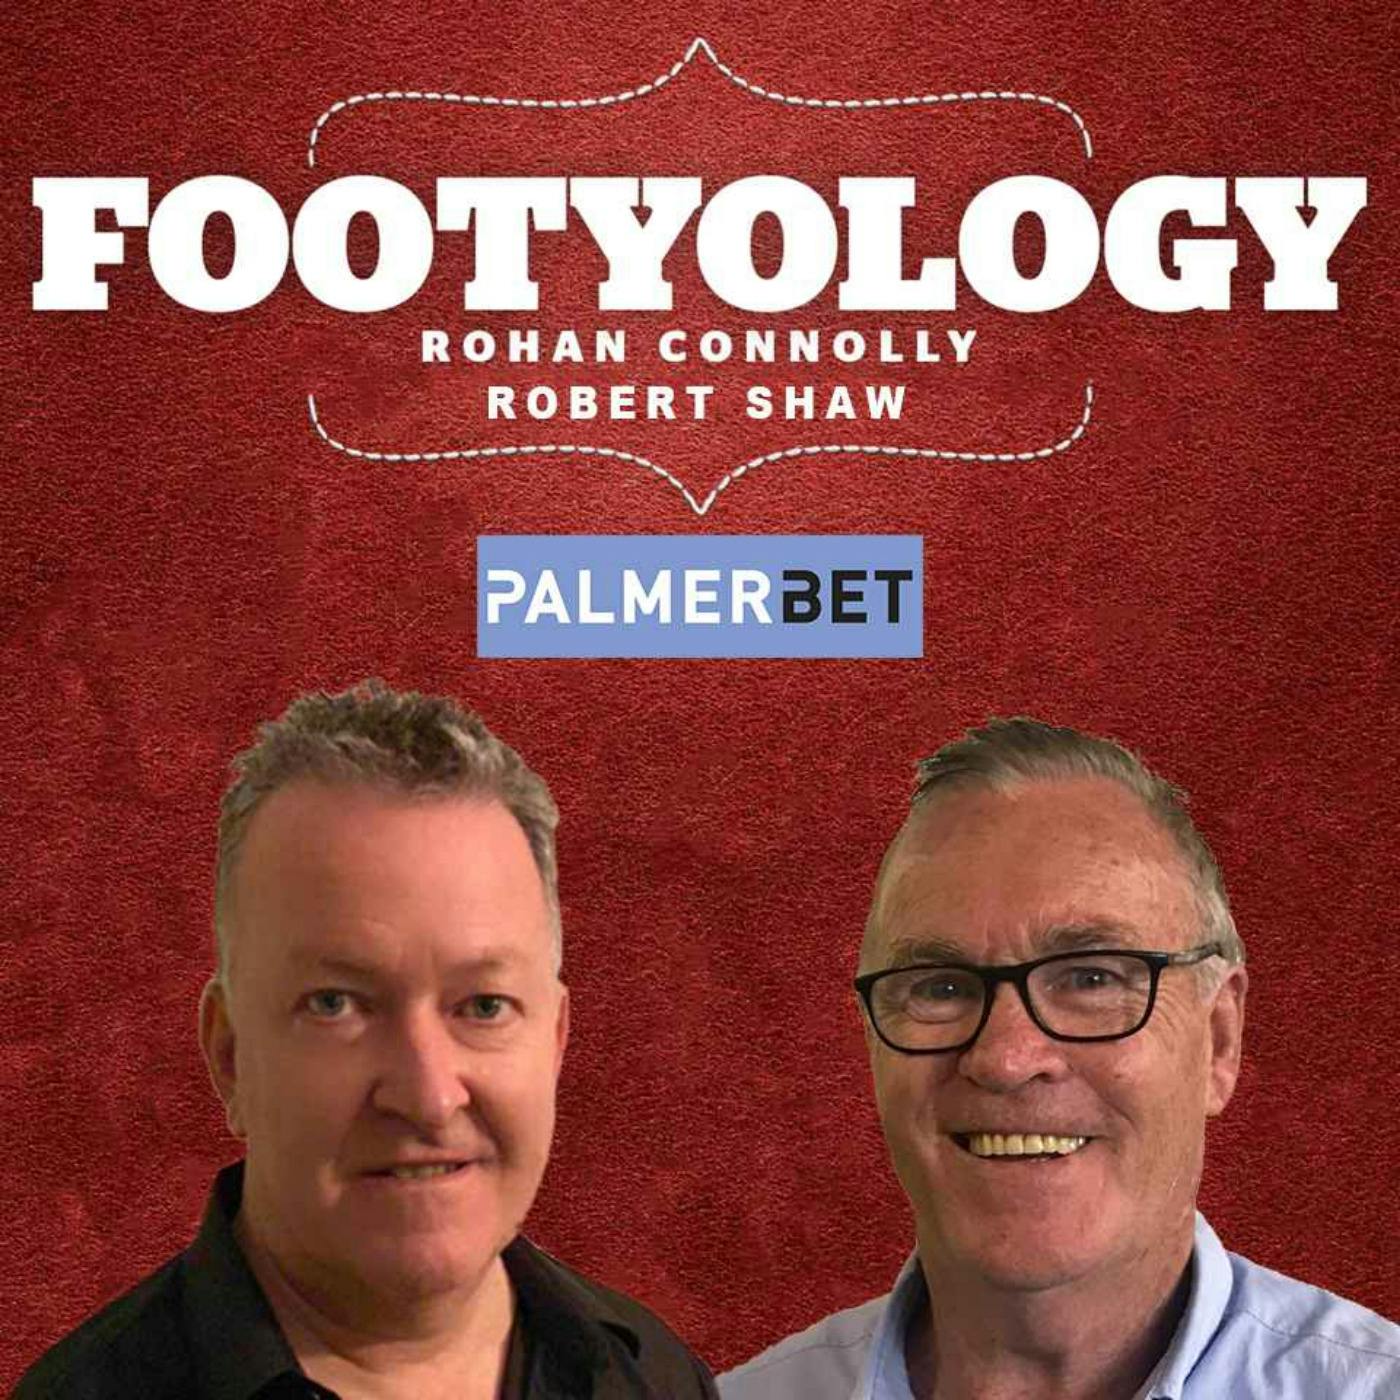 Footyology Podcast - September 18th 2022